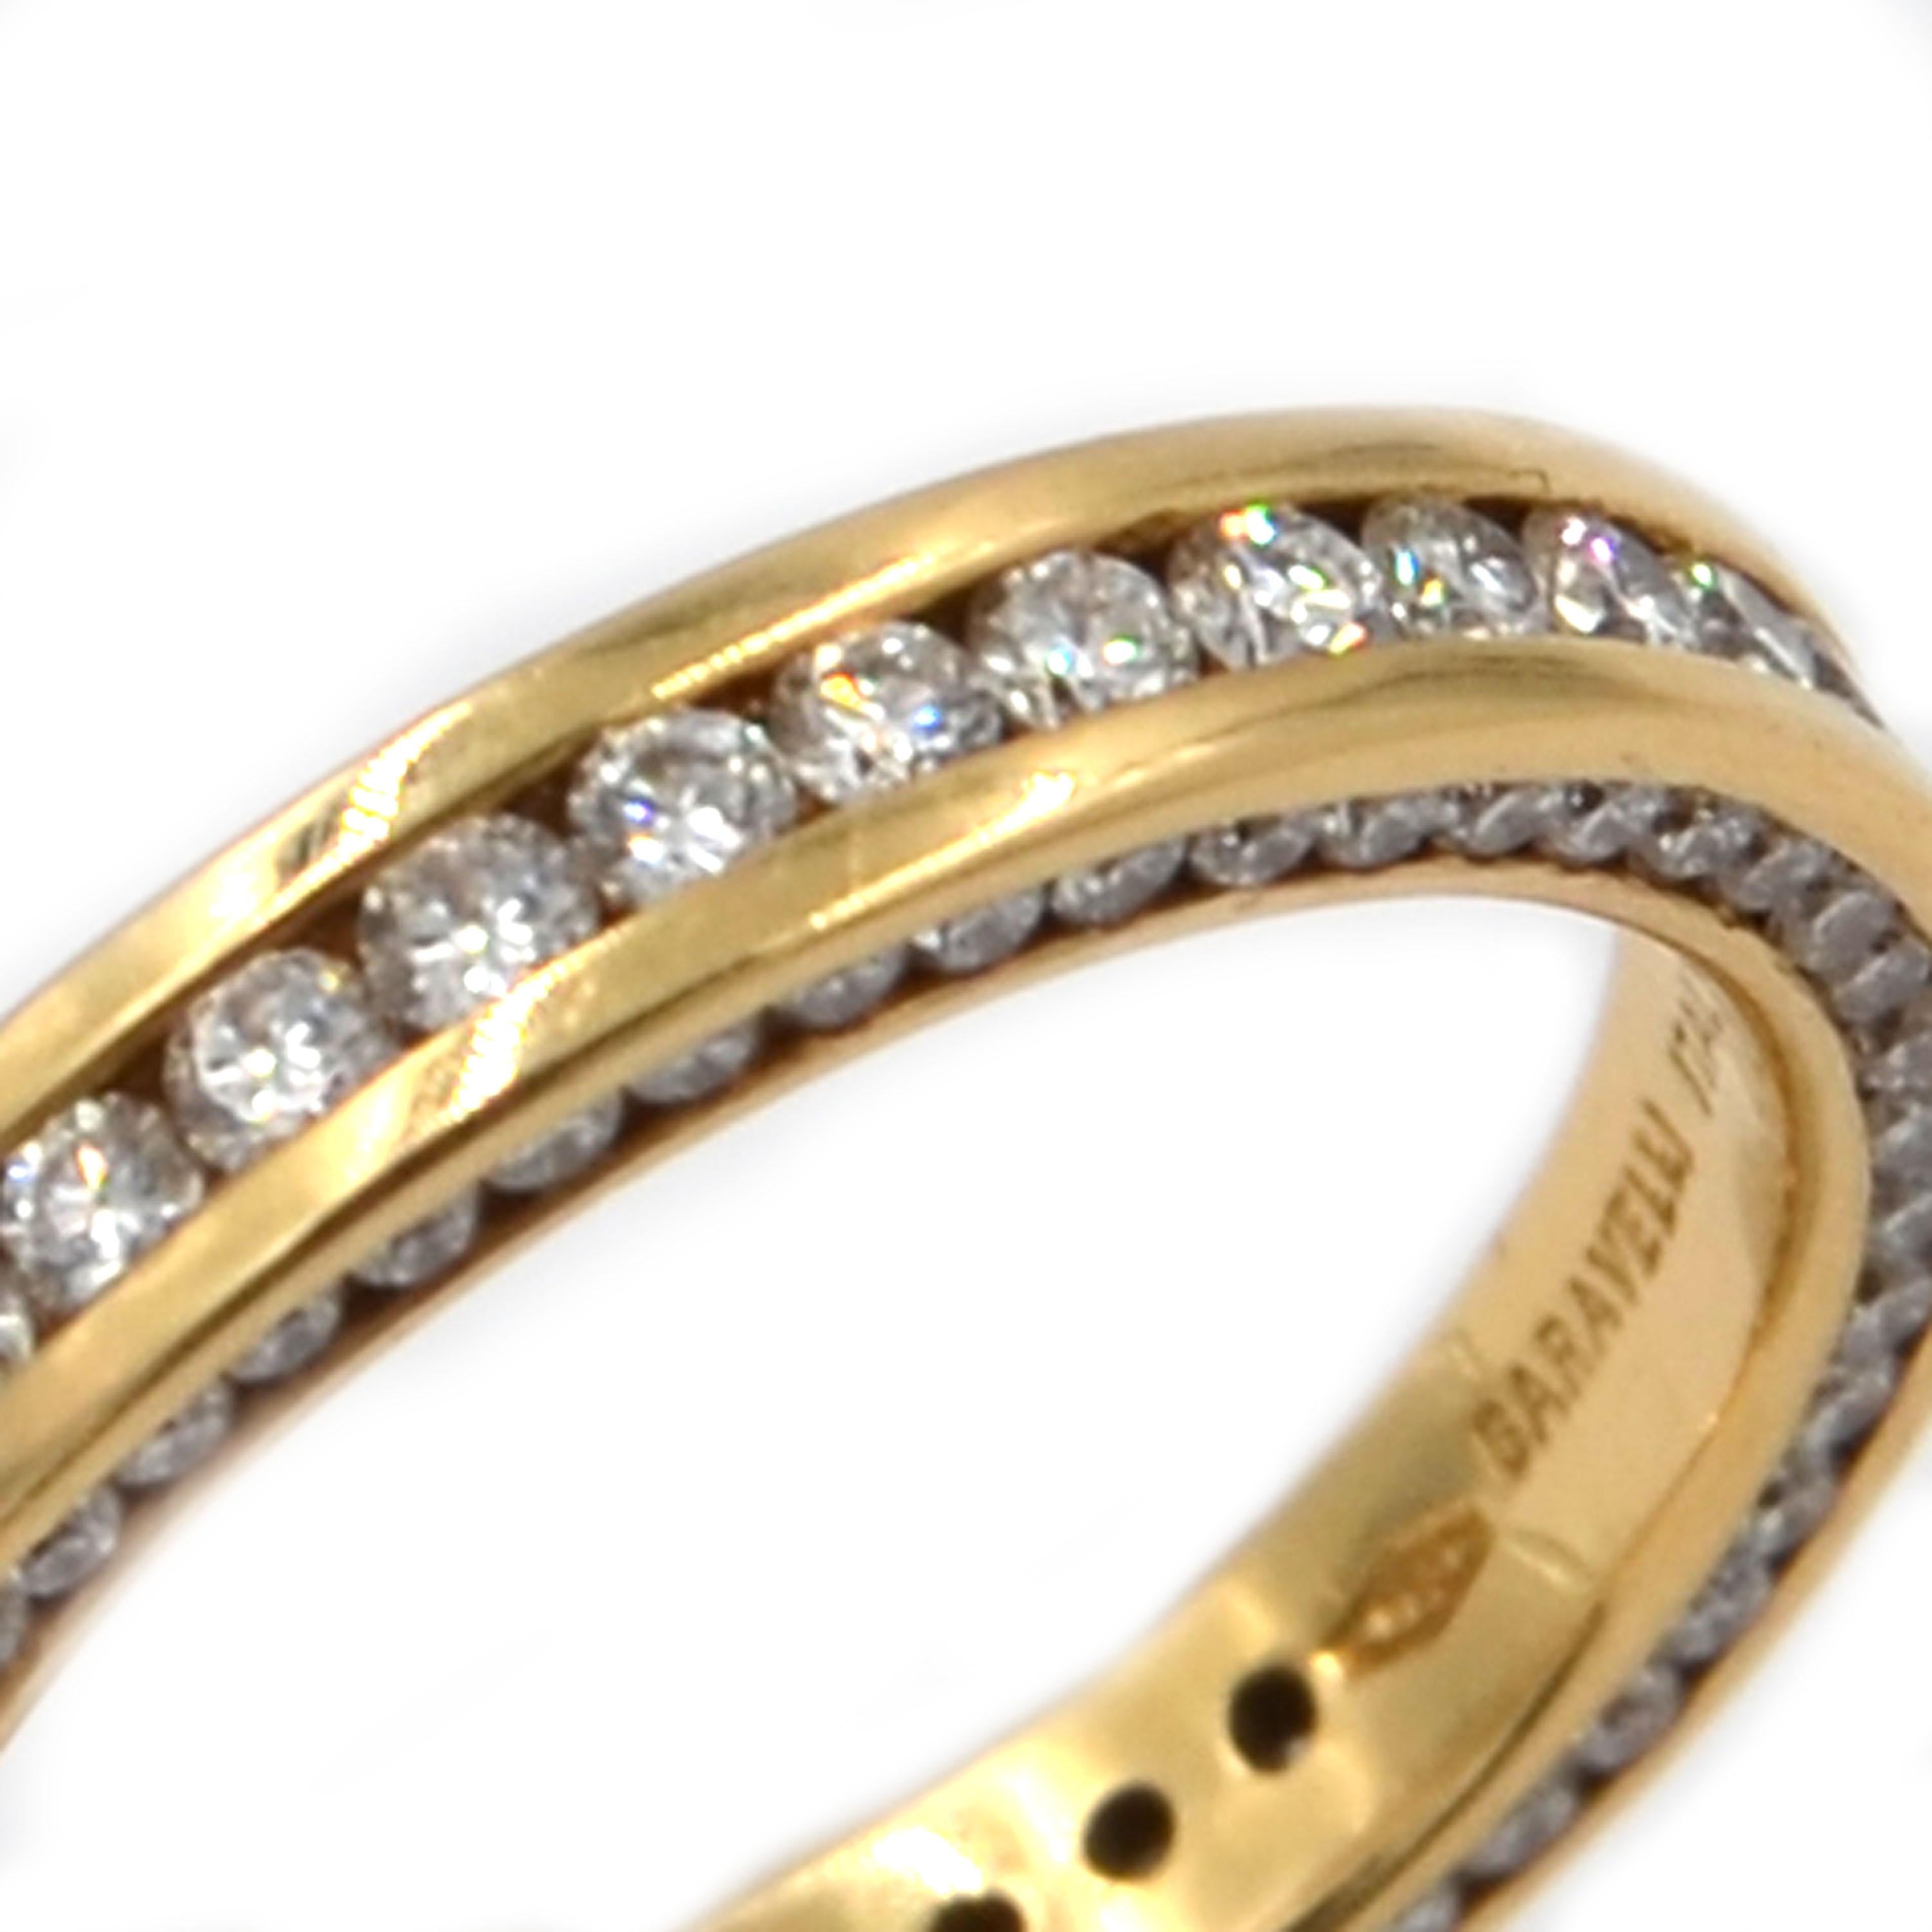 Garavelli 18 Karat Yellow Gold Diamonds Eternity Band Ring, size 54
This interesting band is set with white diamonds on the three sides.
Made In Italy 
18kt GOLD gr :4.60
WHITE DIAMONDS ct 1.61